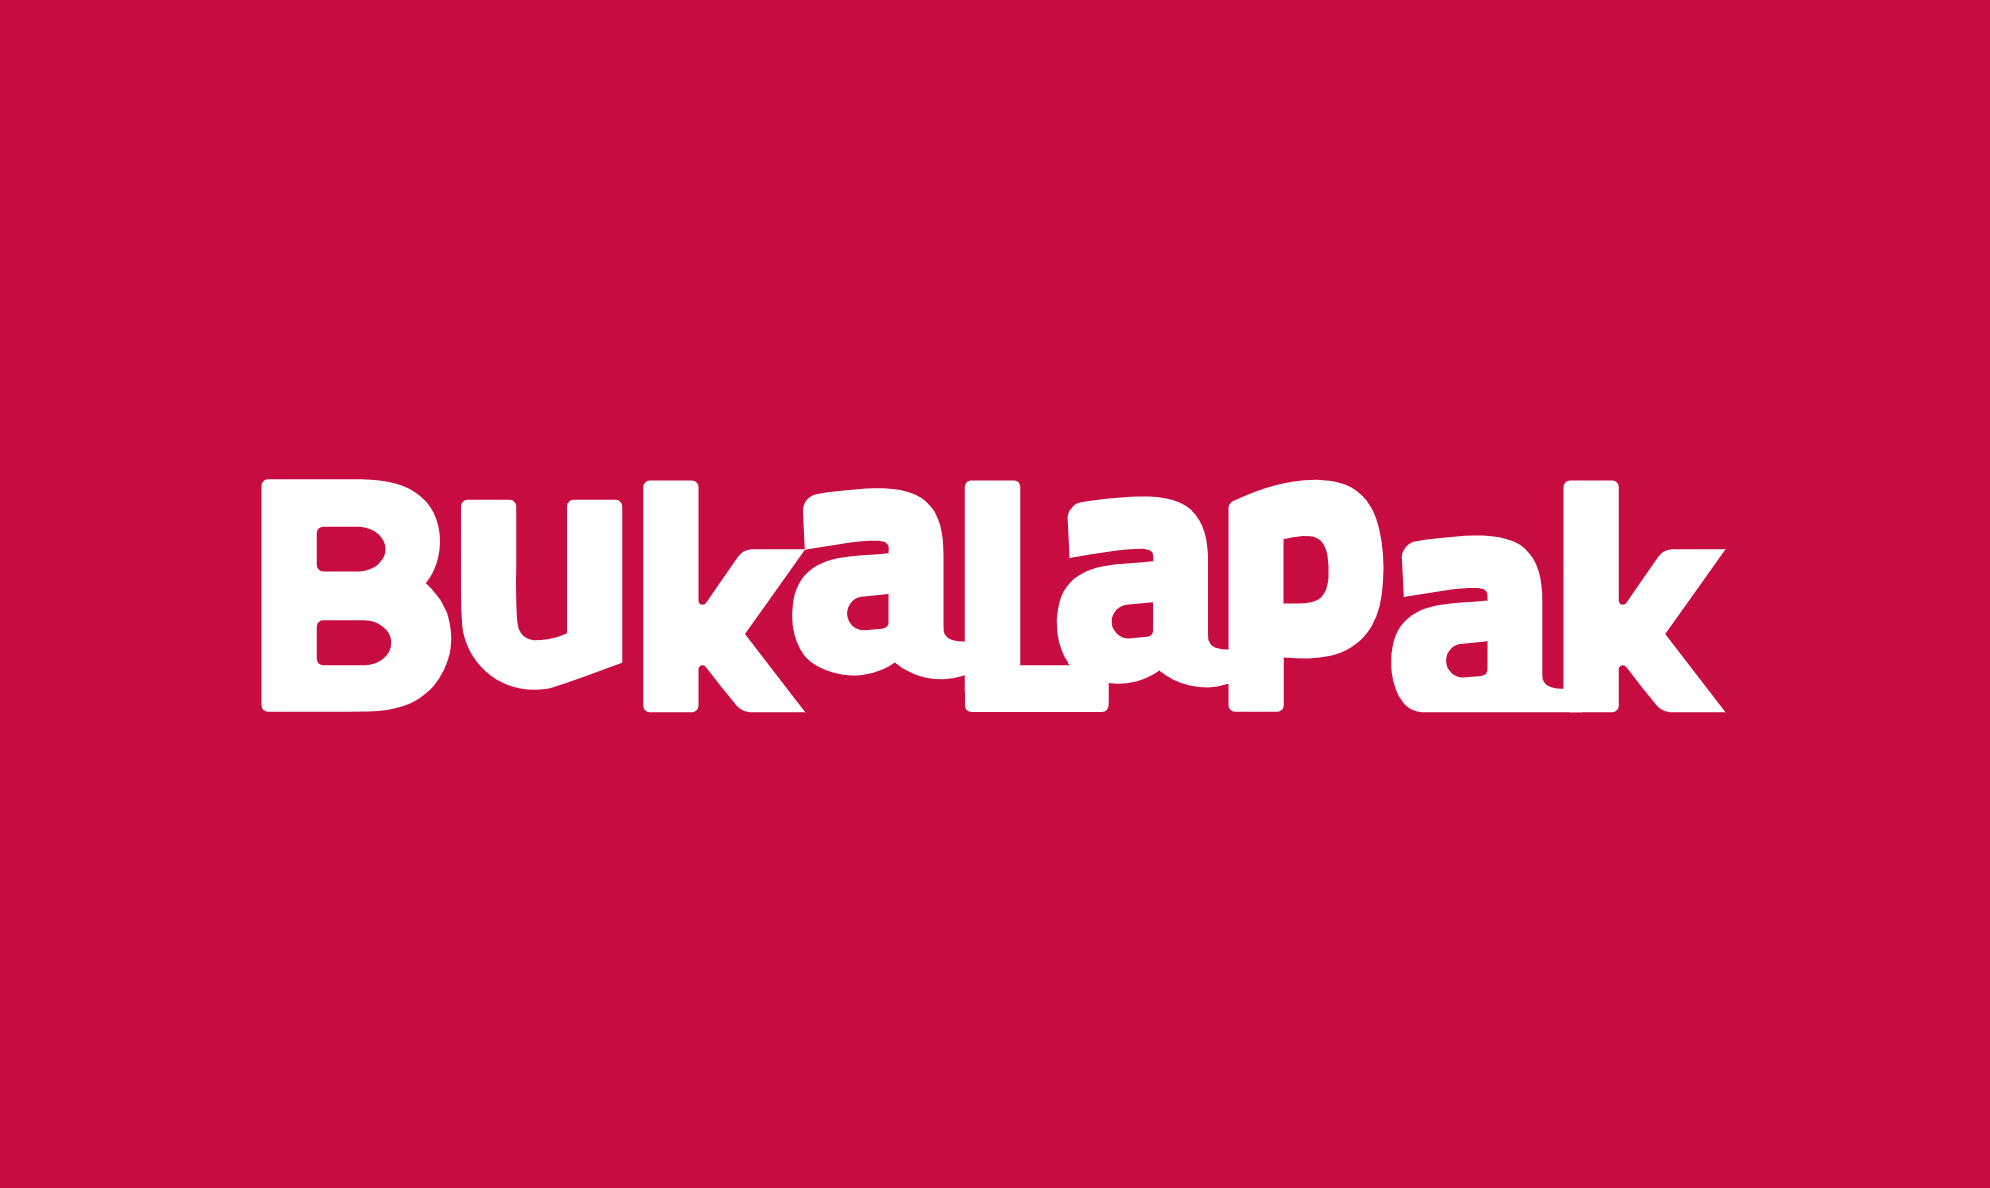 Bukalapak’s seed round pitch deck